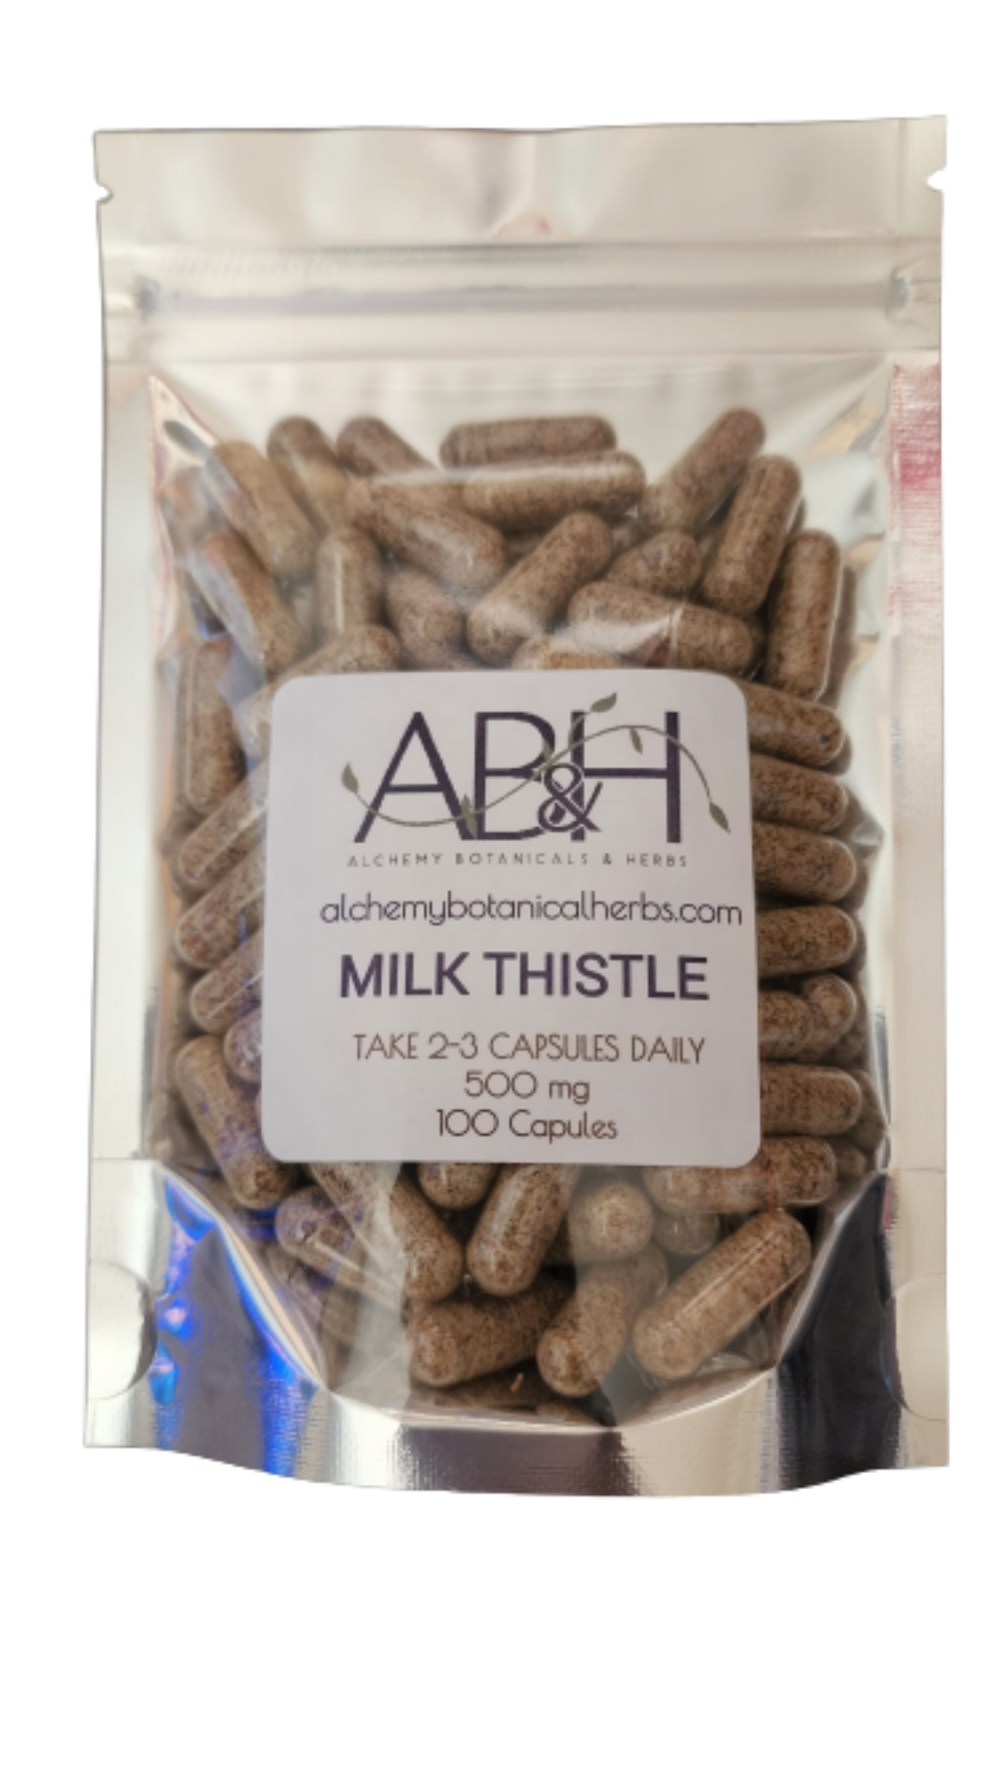 Organic Milk Thistle Seed Powder Capsules  High Quality Liver Flush Cleanse Detoxification, Mood Booster, Immune System Strength    500mg of High Potency Milk Thistle Recommended 2-3 Capsules / Day Made Fresh Organic, Non-GMO, No Binders, No Fillers, No Sweeteners, Color Dyes Vegetarian Capsules Ships Fast & Free from USA  100 Capsules